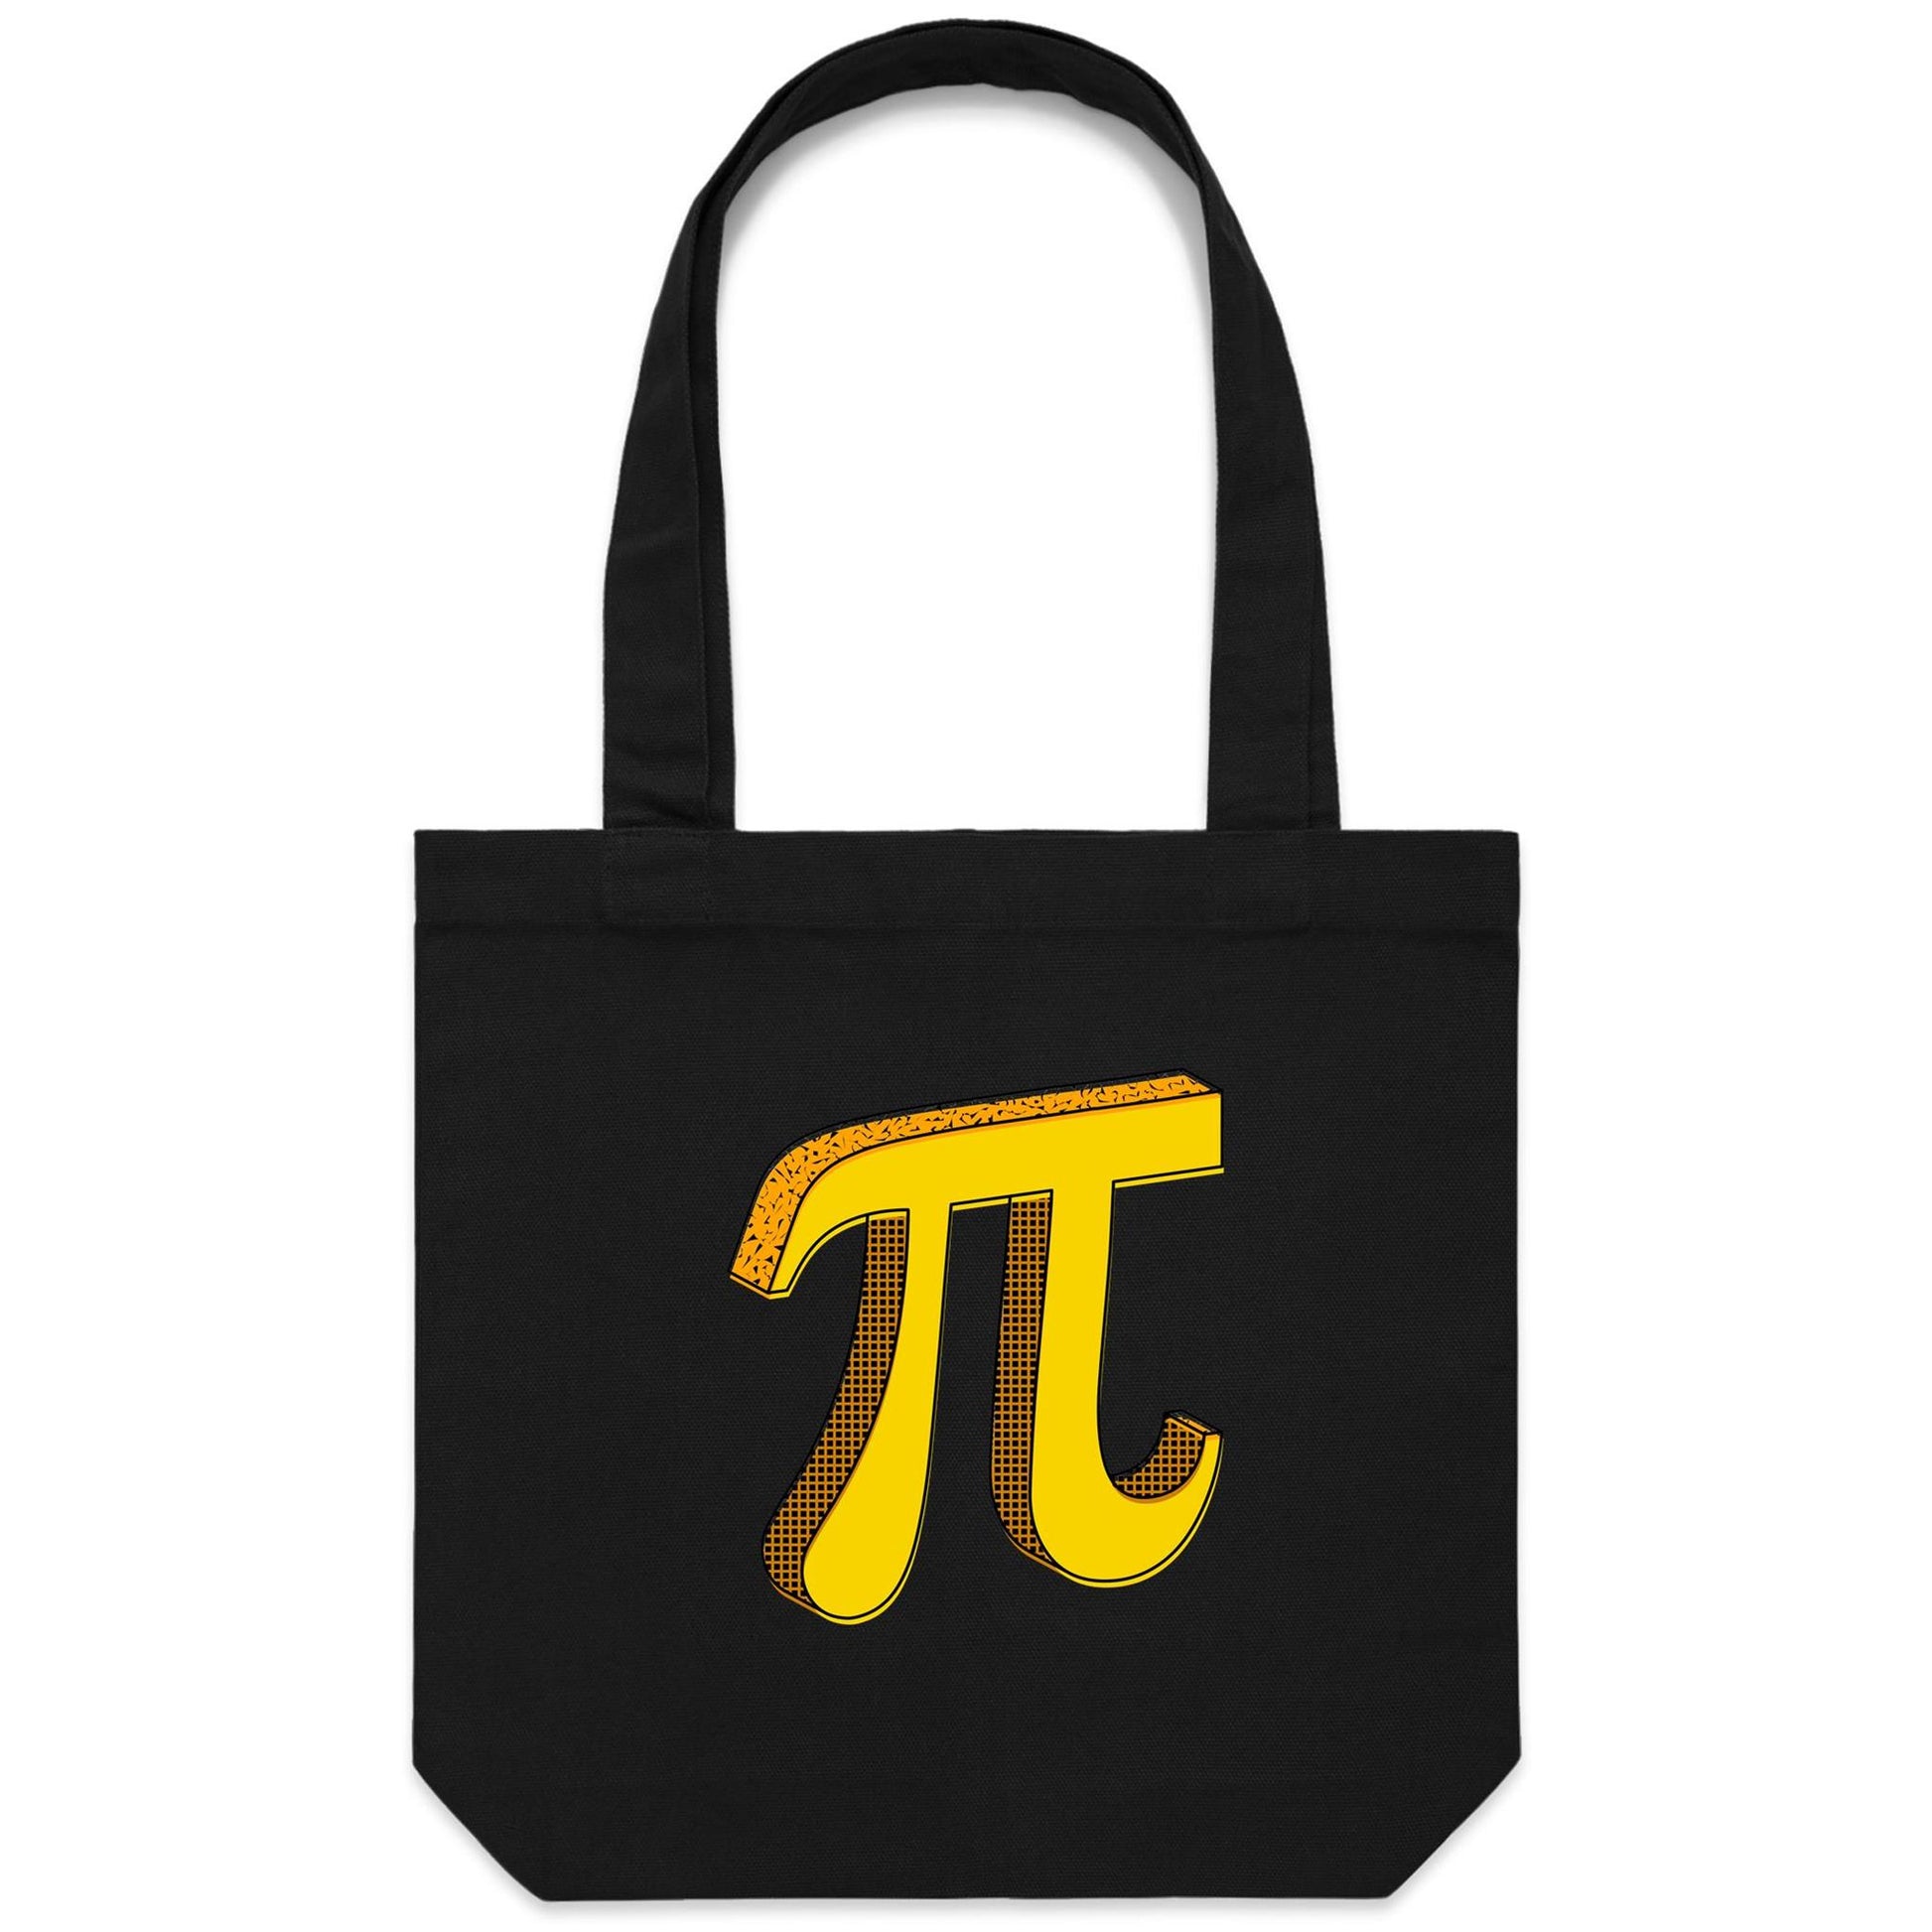 Pi - Canvas Tote Bag Black One Size Tote Bag Science